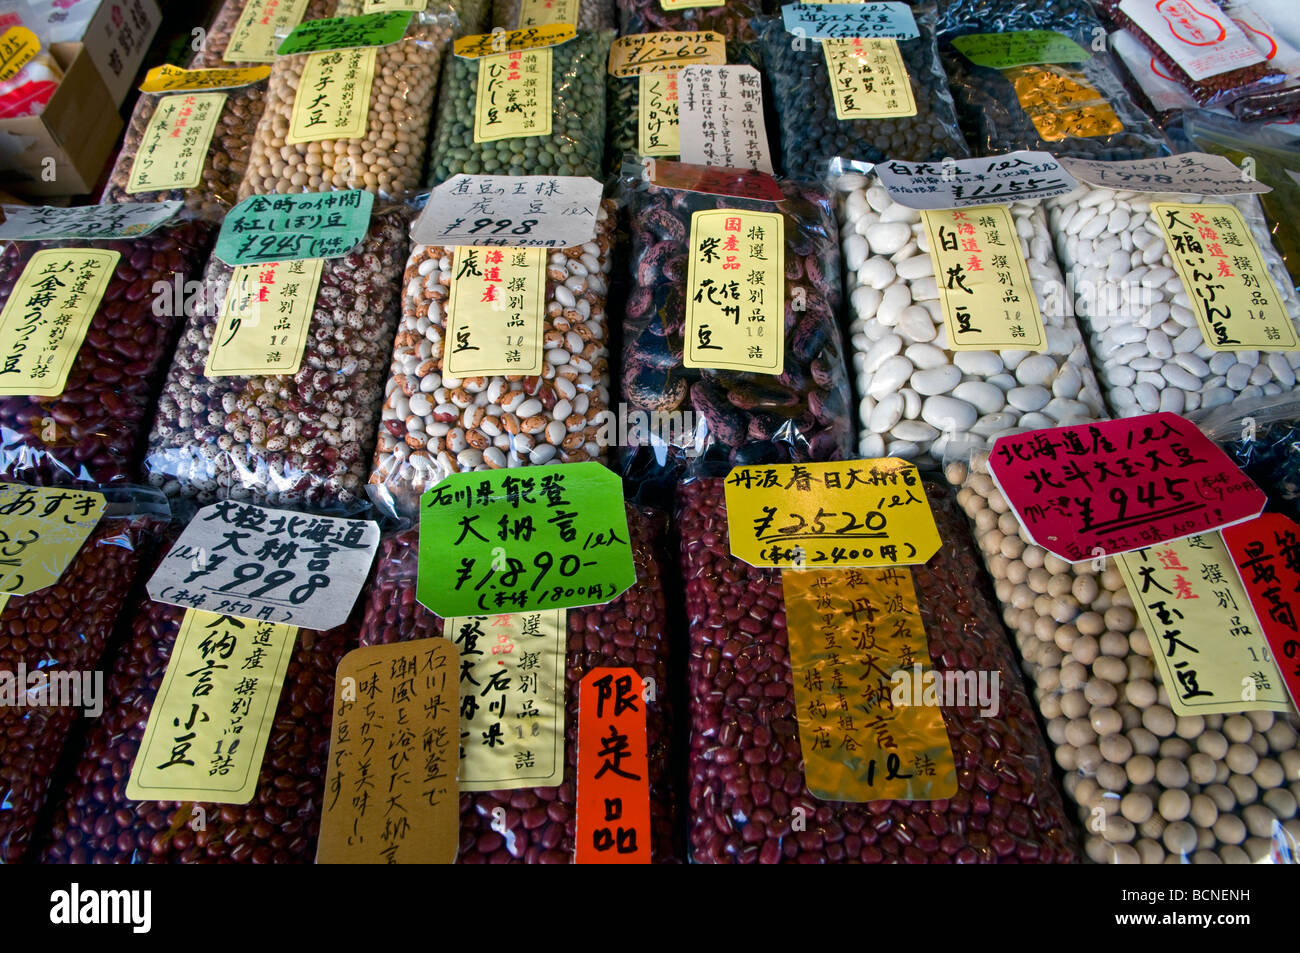 Variety of dry seeds on sale in the market Tokyo Japan Stock Photo